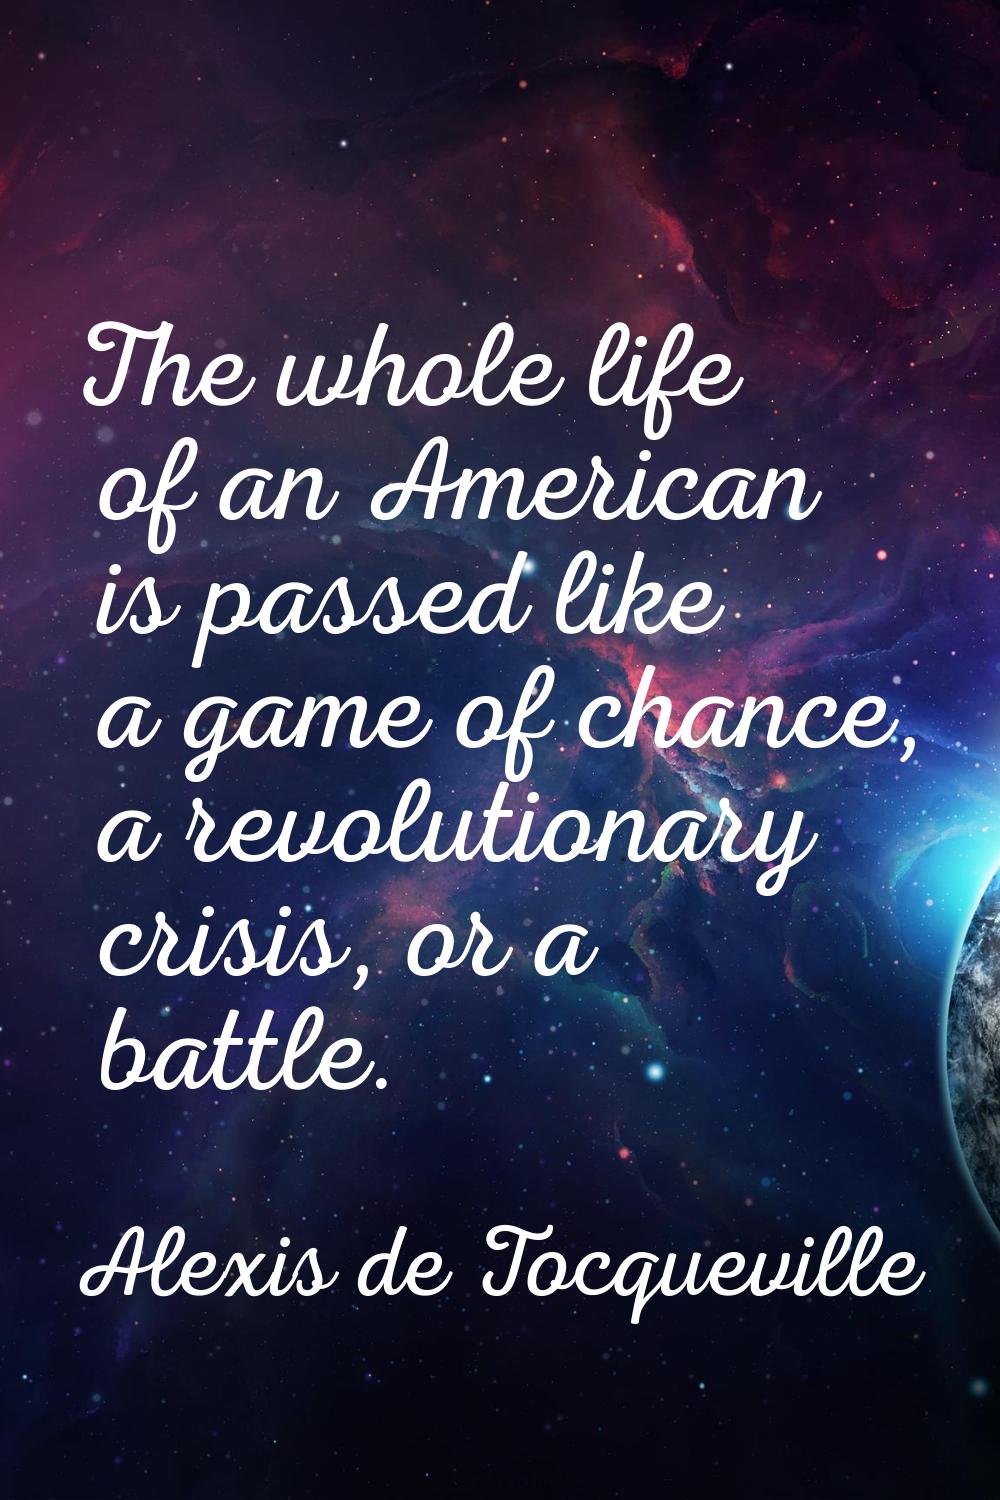 The whole life of an American is passed like a game of chance, a revolutionary crisis, or a battle.